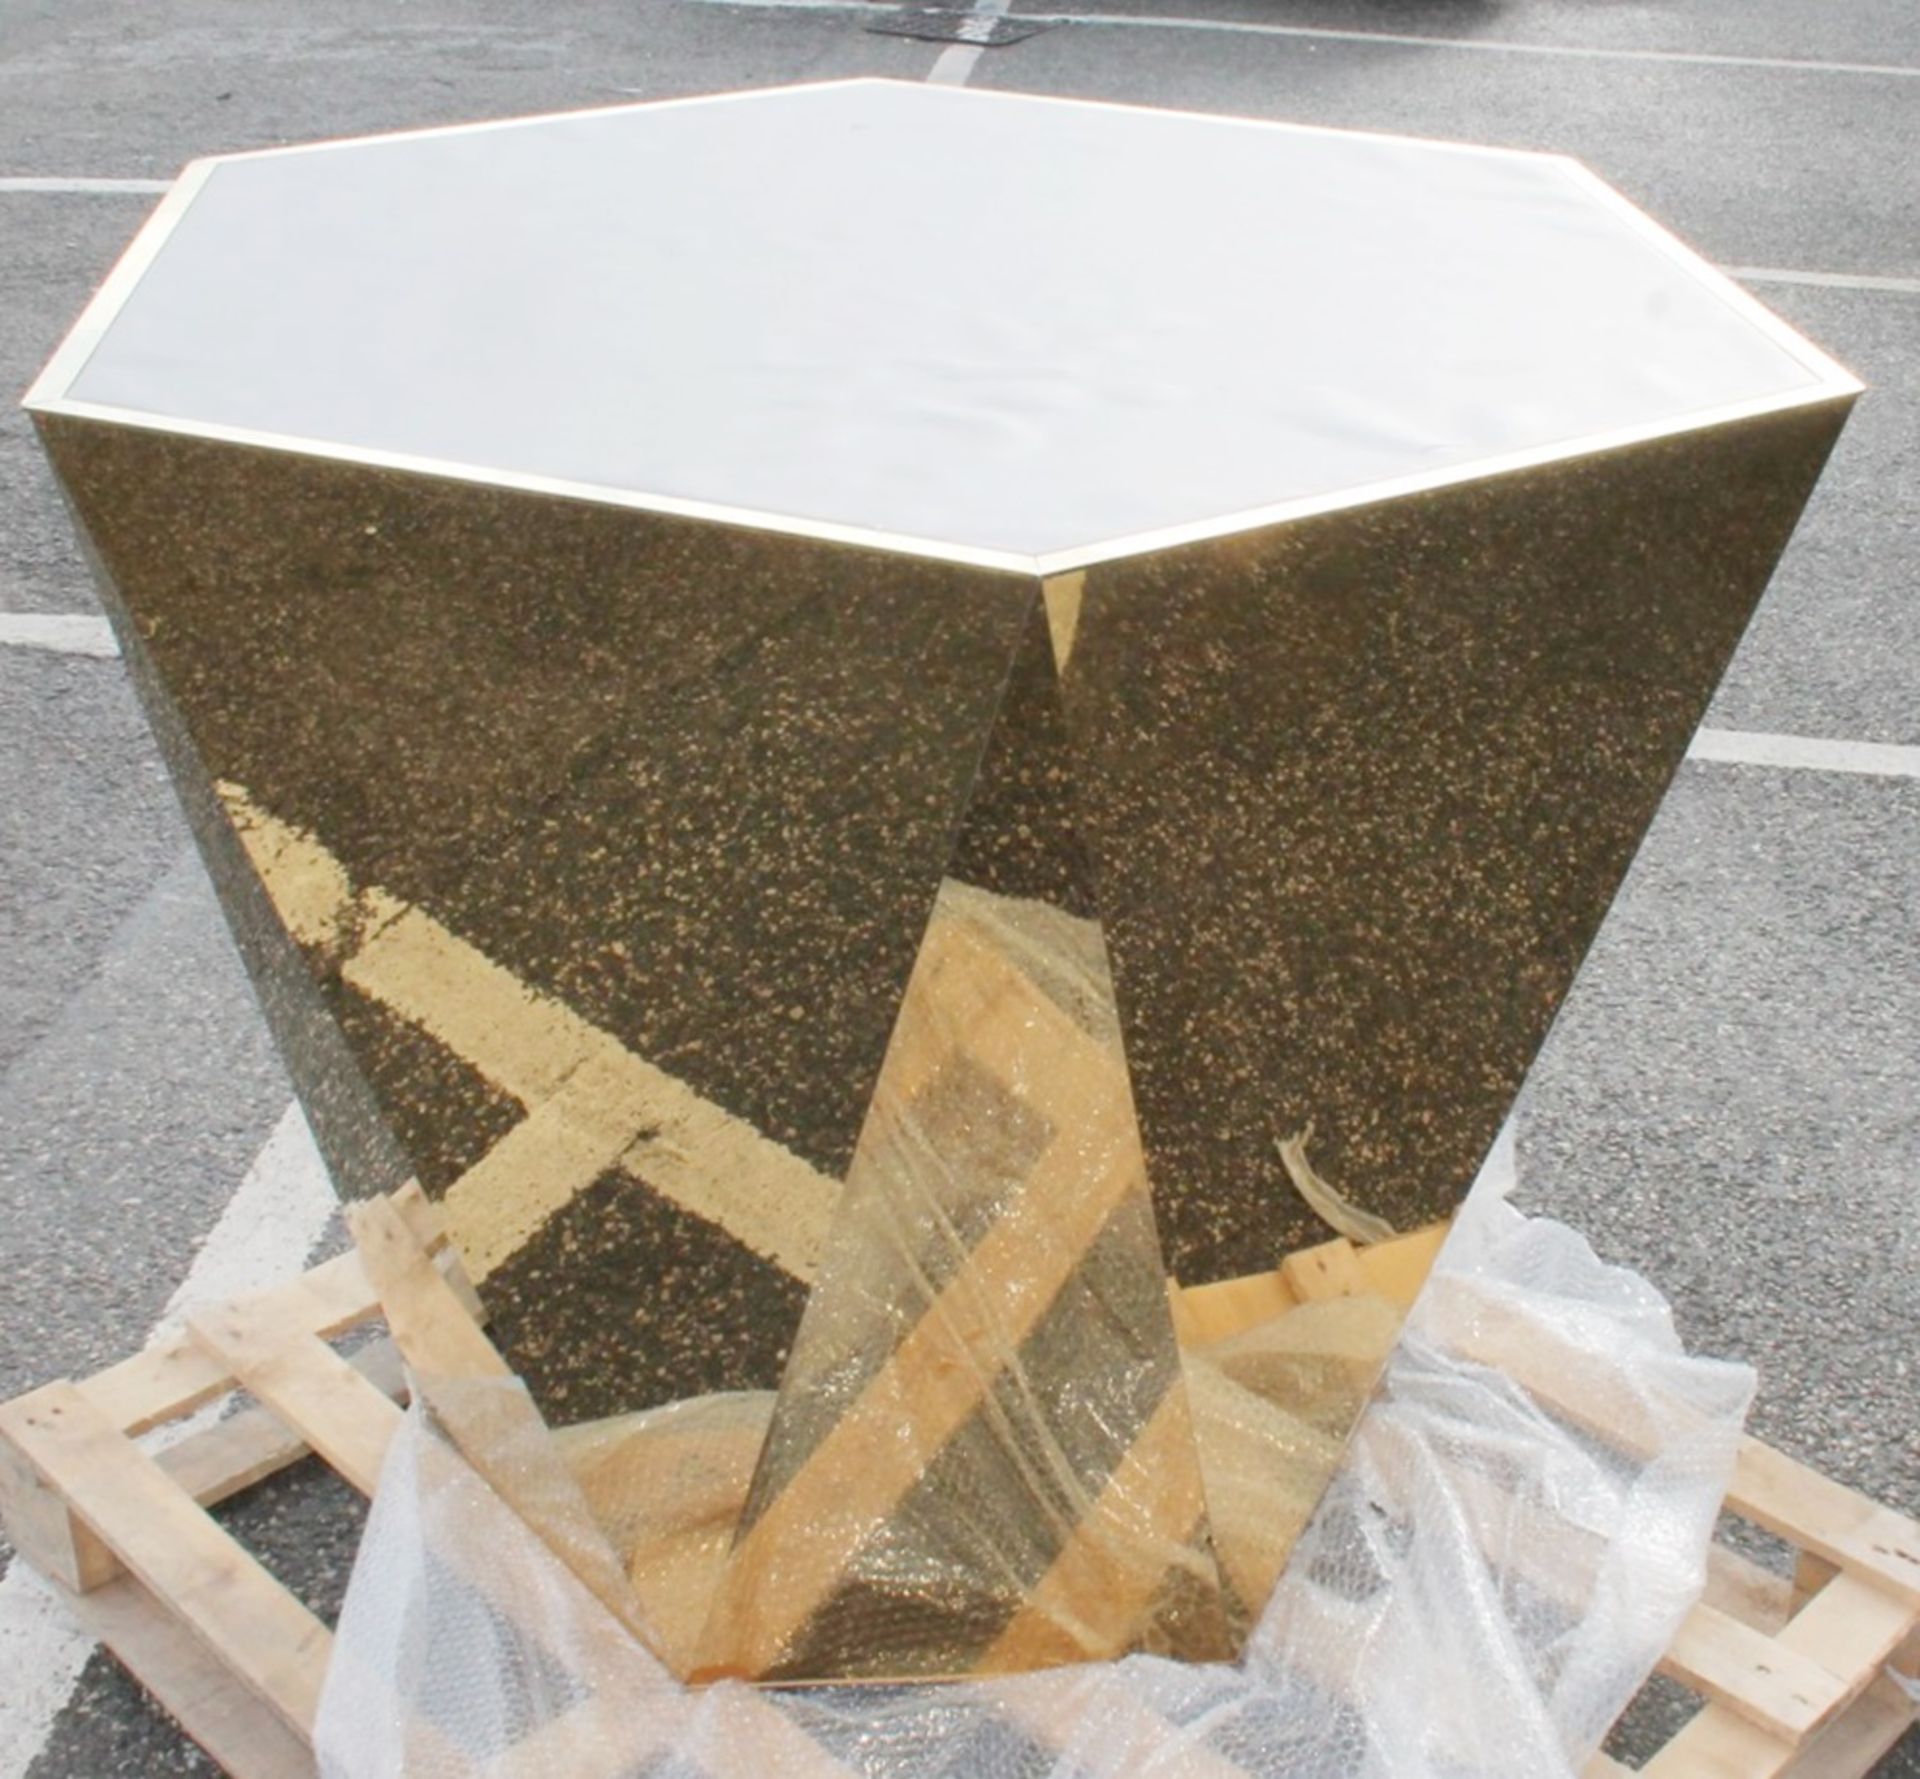 1 x Impressive Hexegon Wrapping Station / Shop Counter Fixture In Gold - Recently Removed From A - Image 2 of 5